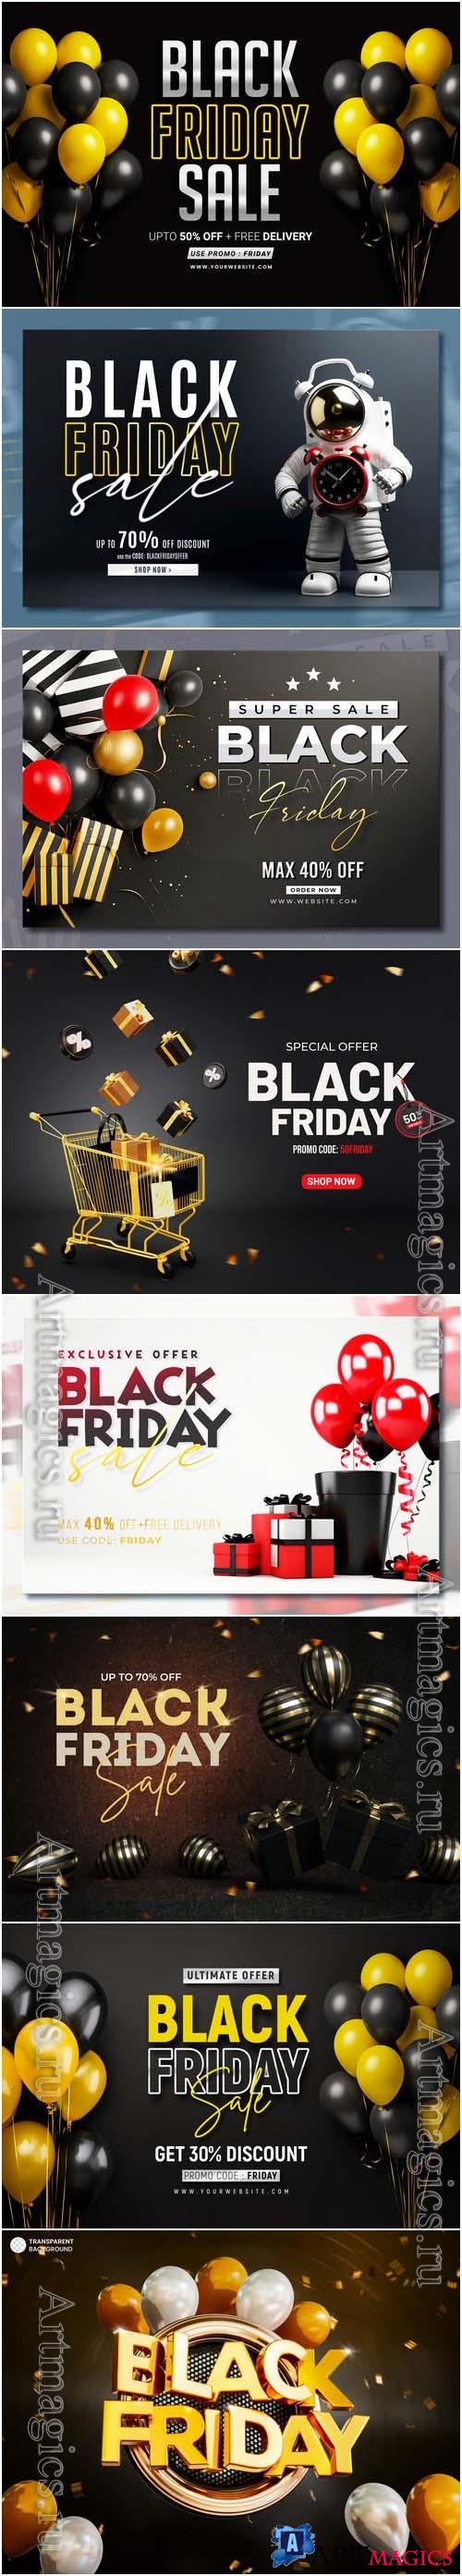 Black friday sale banner with realistic 3d gifts and balloons in psd vol 2